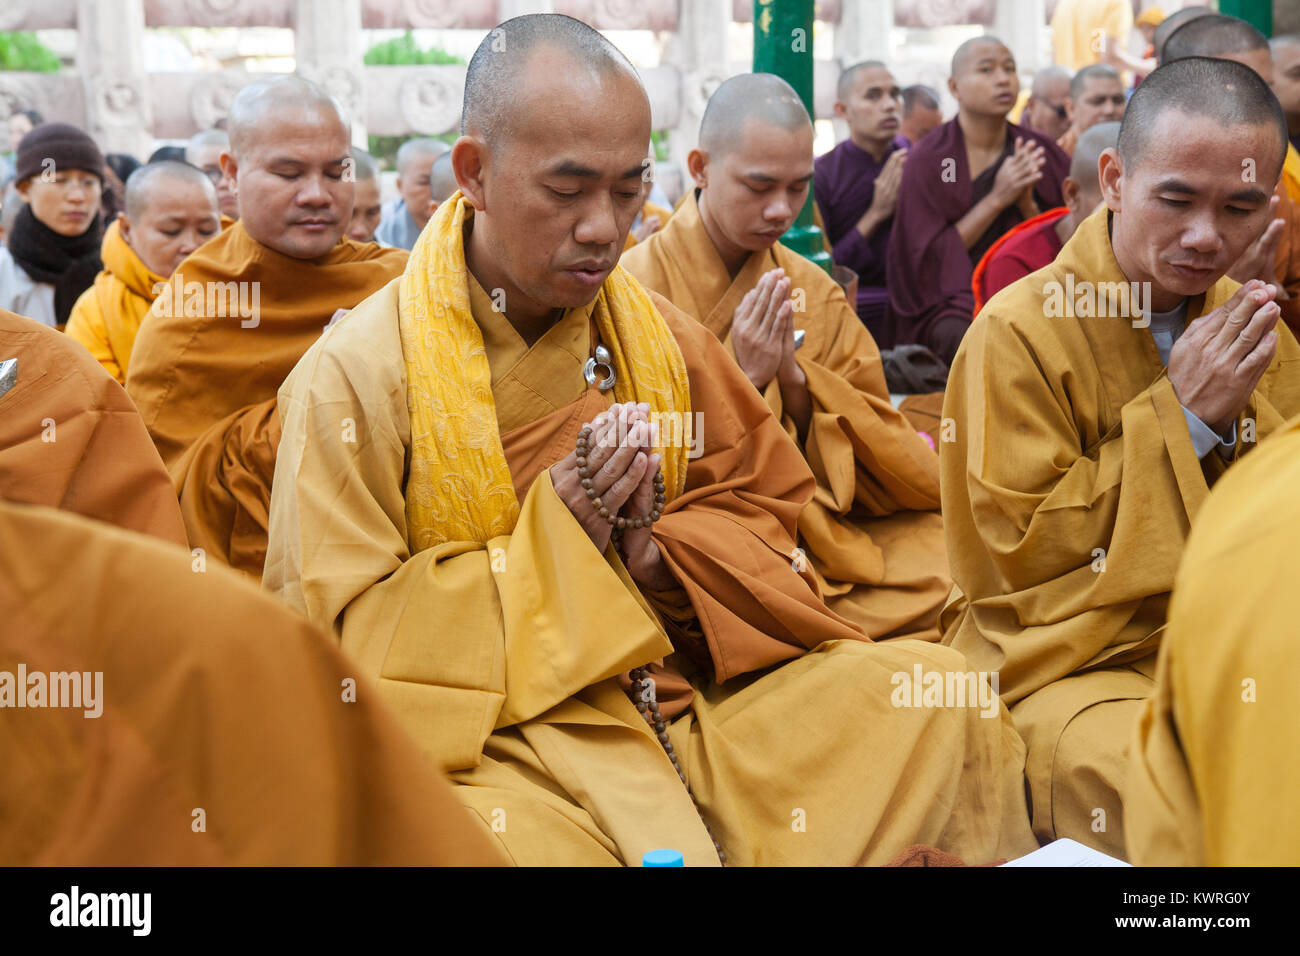 Monks praying at the foot of the Bodhi tree (where the Buddha is said to have gained enlightenment) at the Mahabodhi Temple in Bodhgaya, India Stock Photo